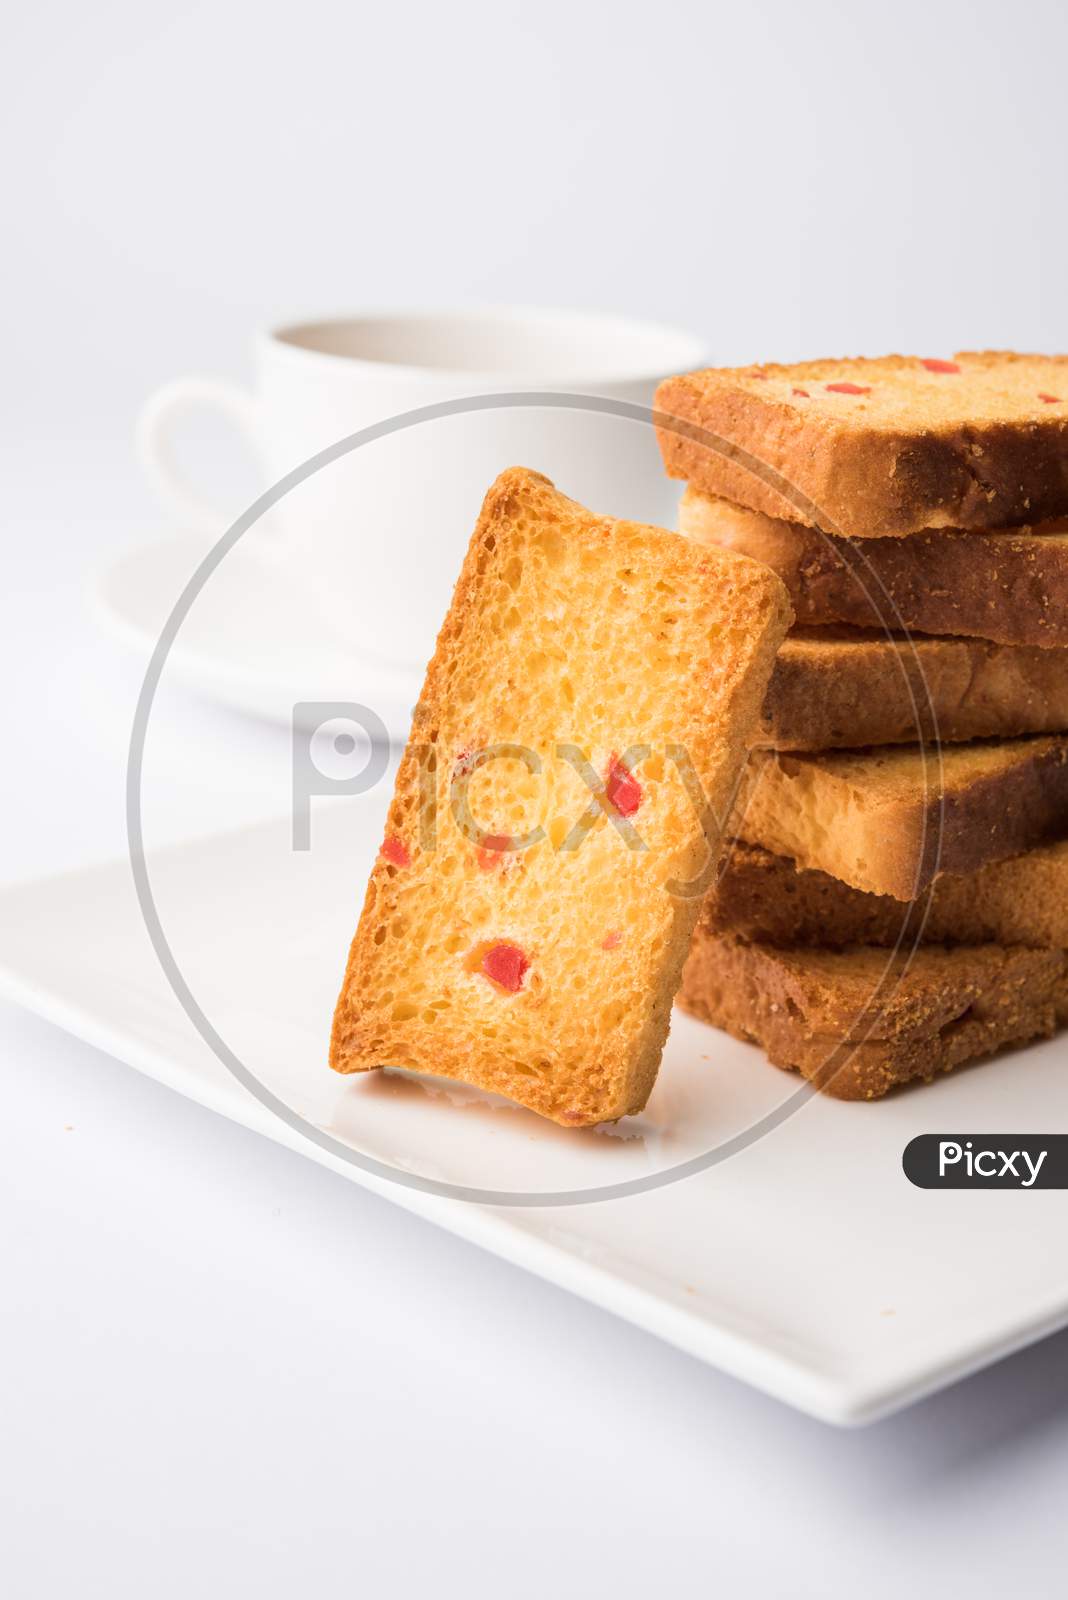 Image of indian punjabi or Delhi bread toast and tea-XS451954-Picxy